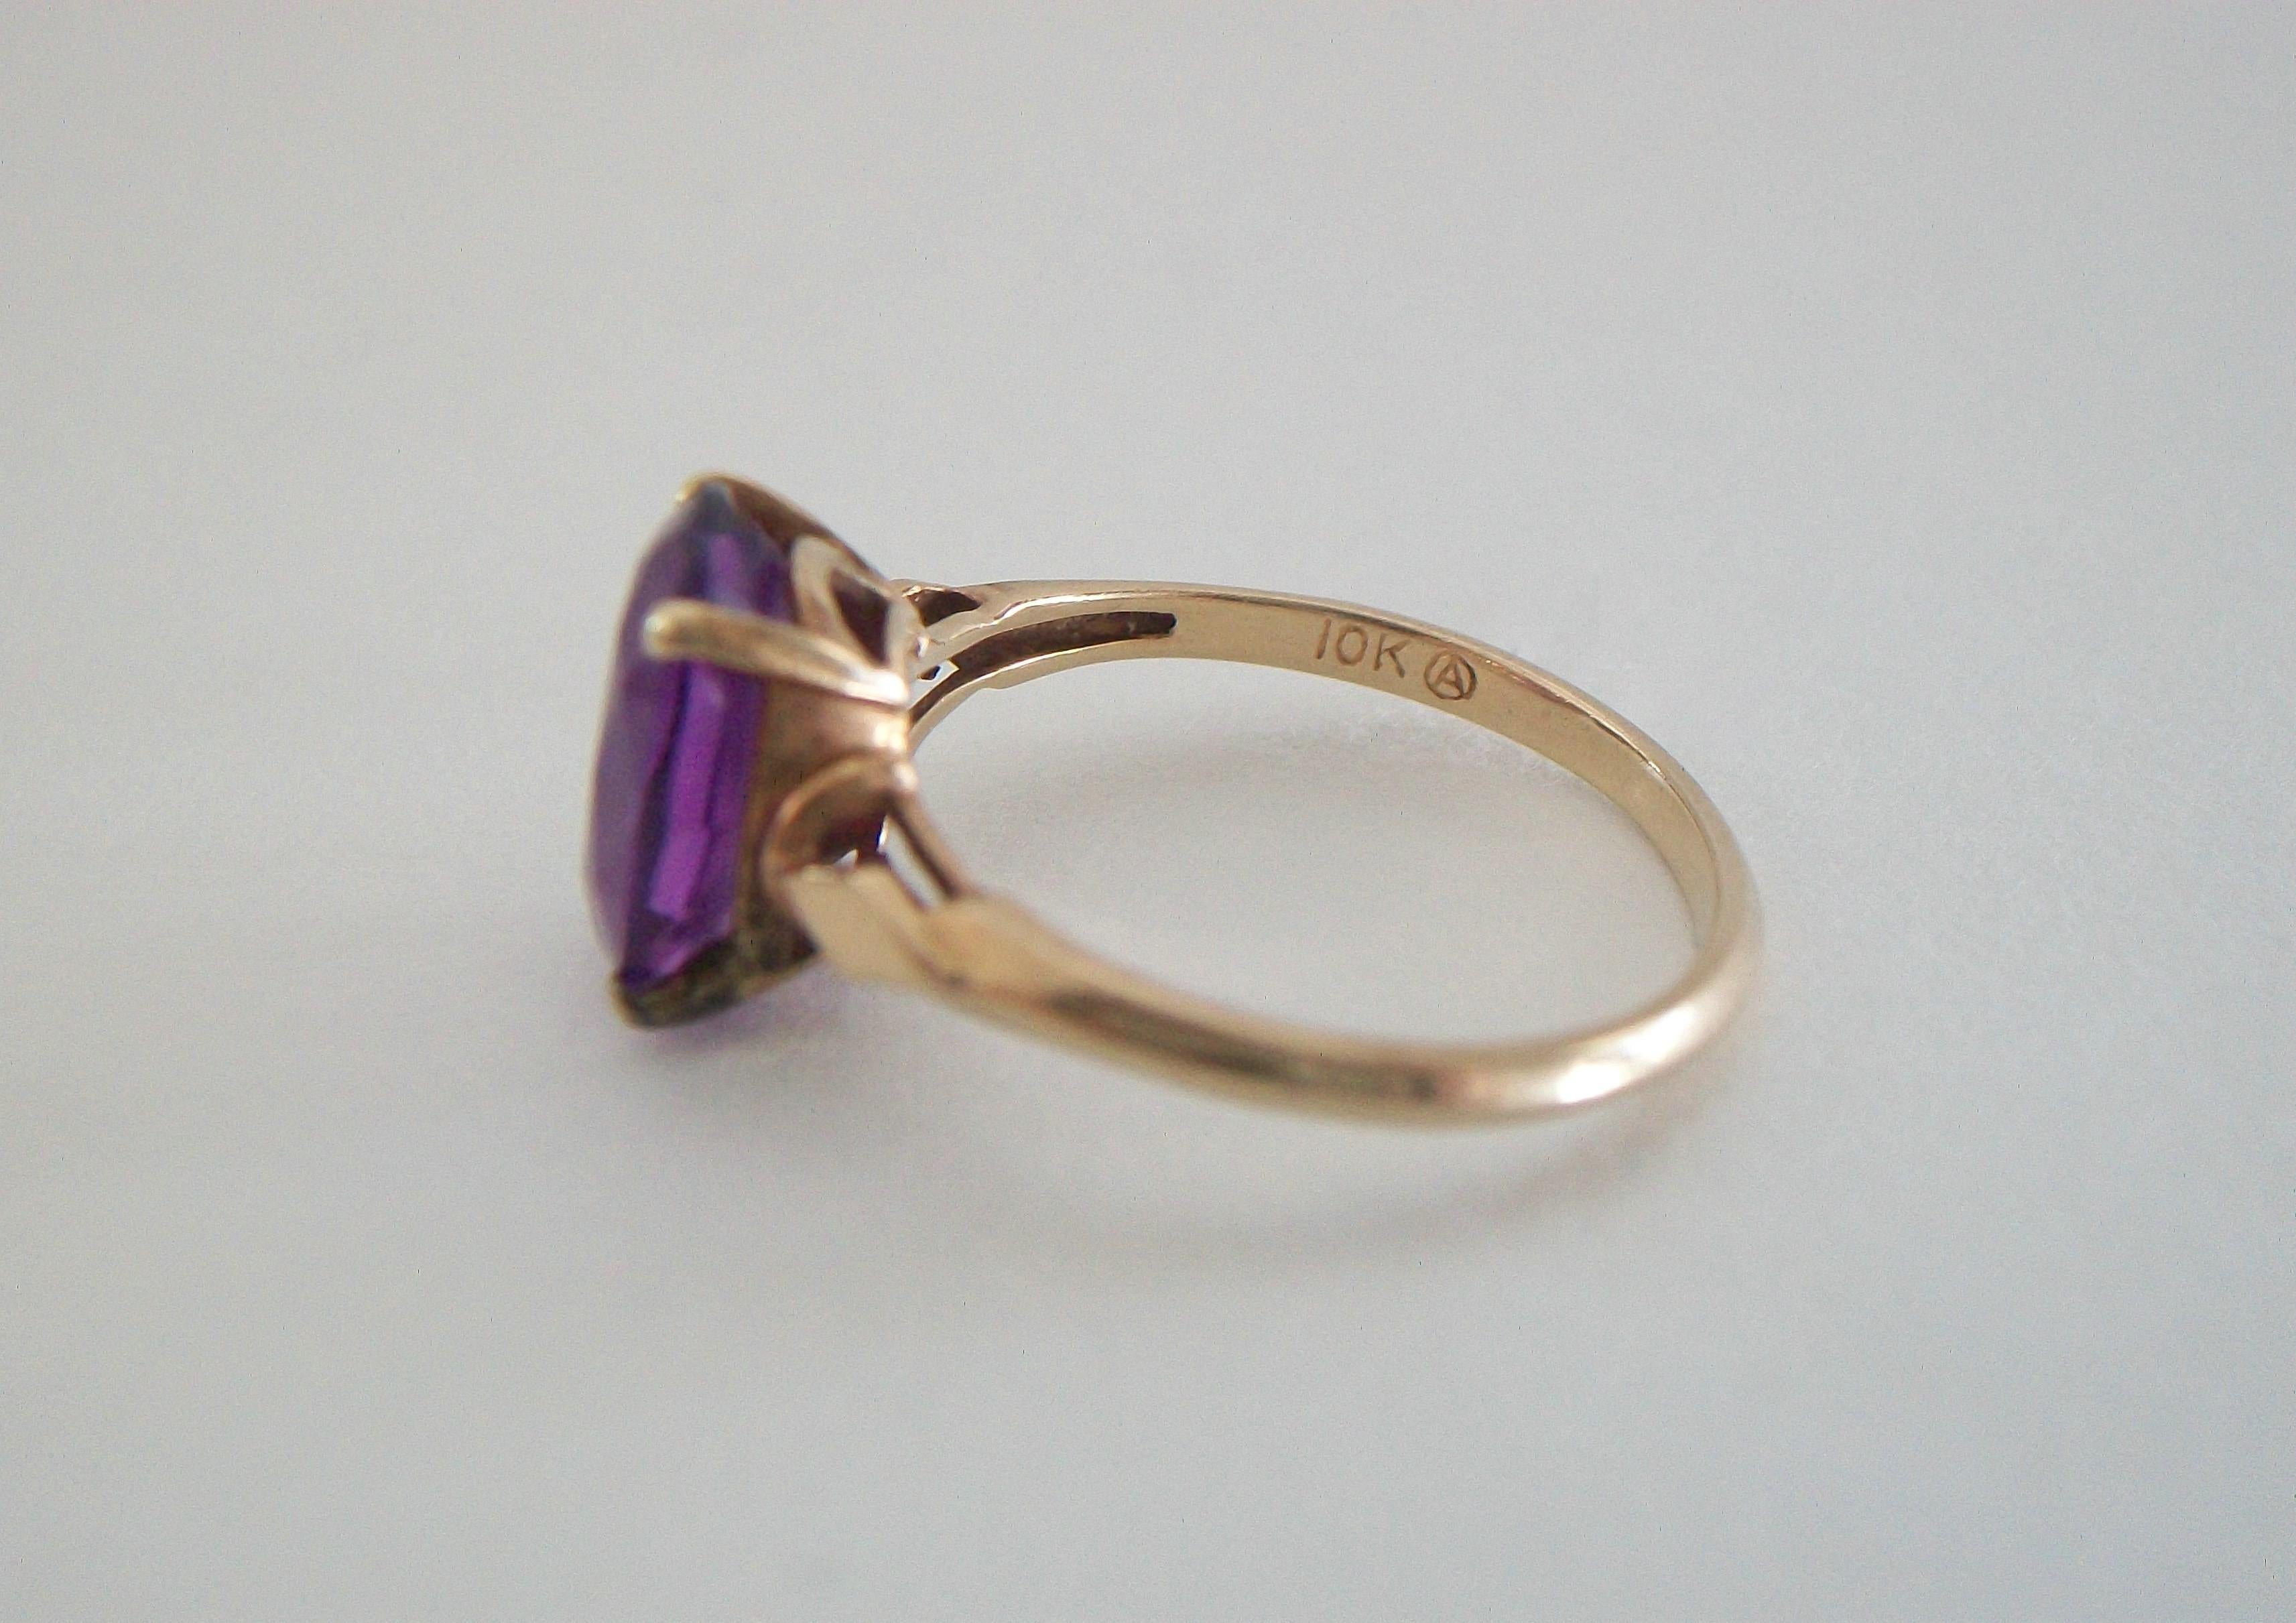 ARTHUR M. ANDERSON - Amethyst & 10K Gold Ring - United States - 20th Century For Sale 1